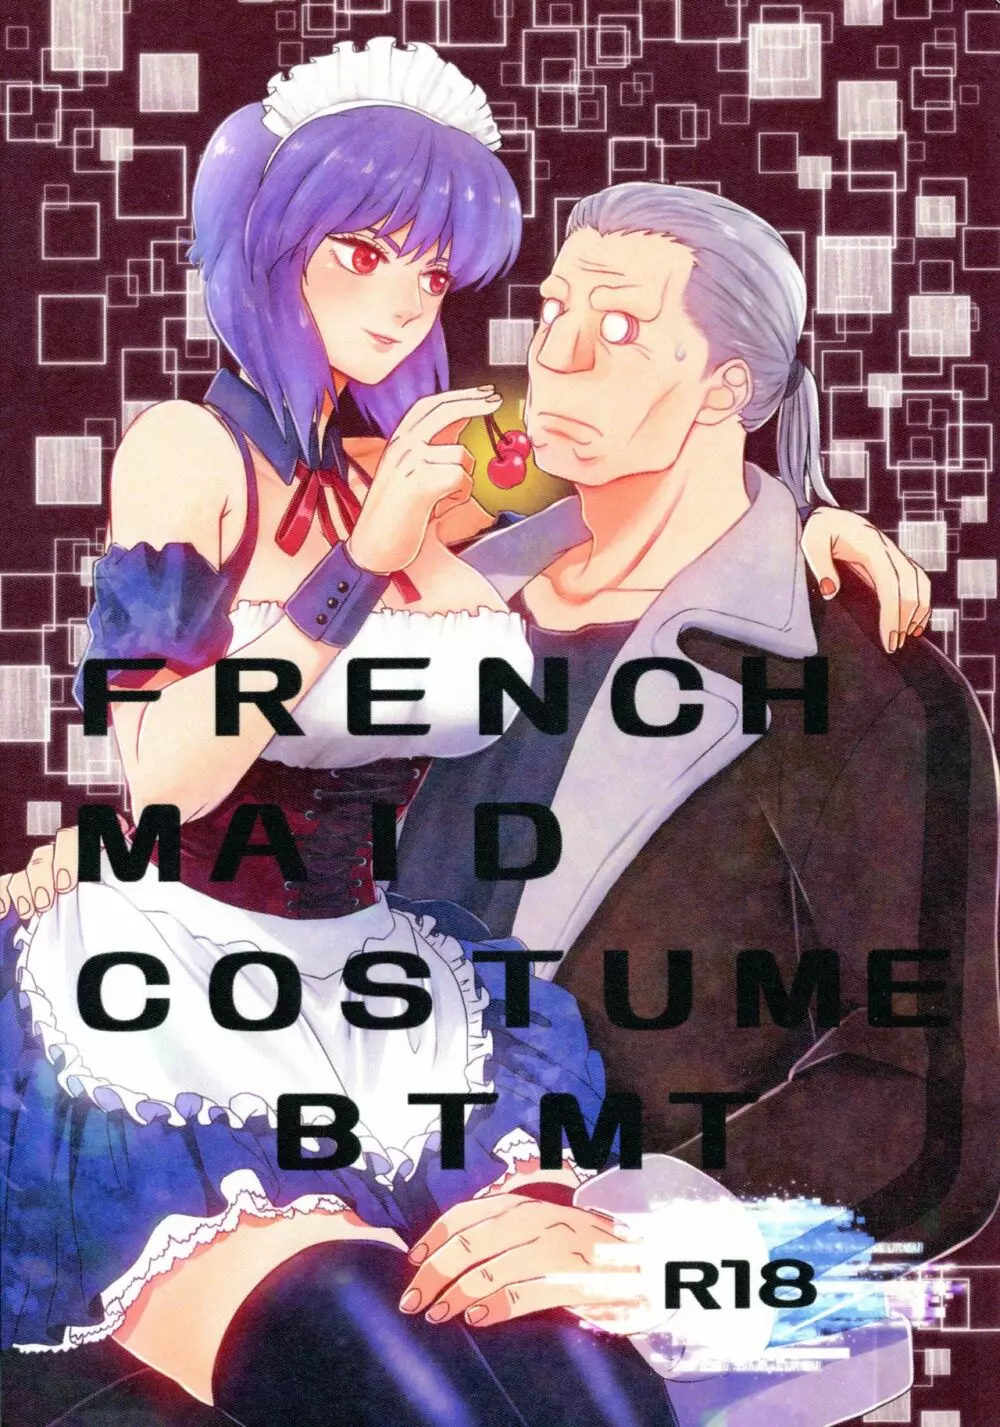 FRENCHMAIDCOSTUME BTMT - page1